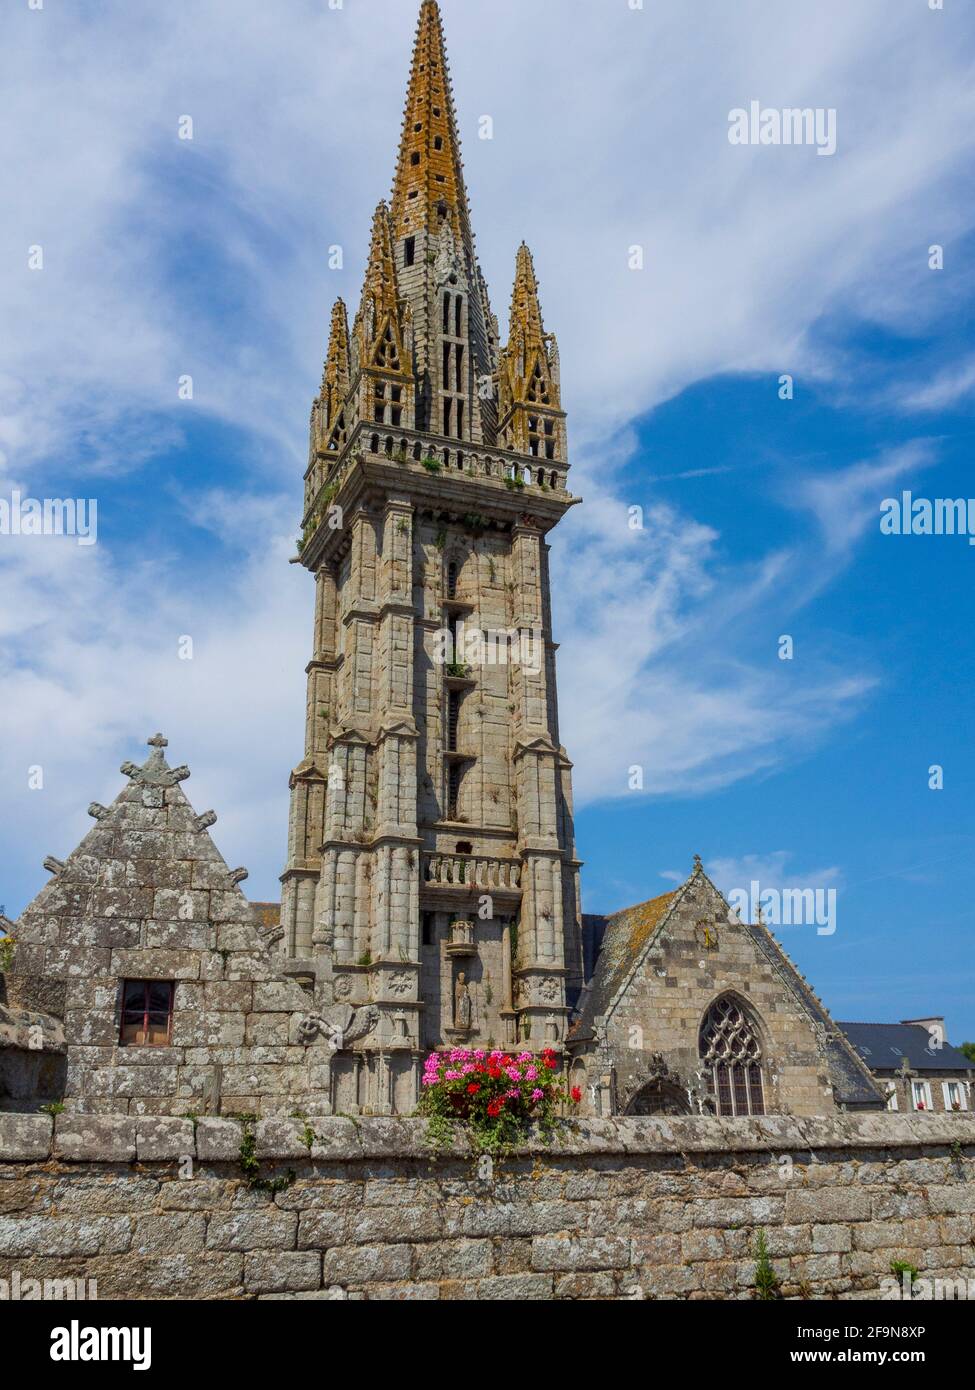 Bell tower of the church of Saint Goulven, Finisttère, Brittany, France. Stock Photo